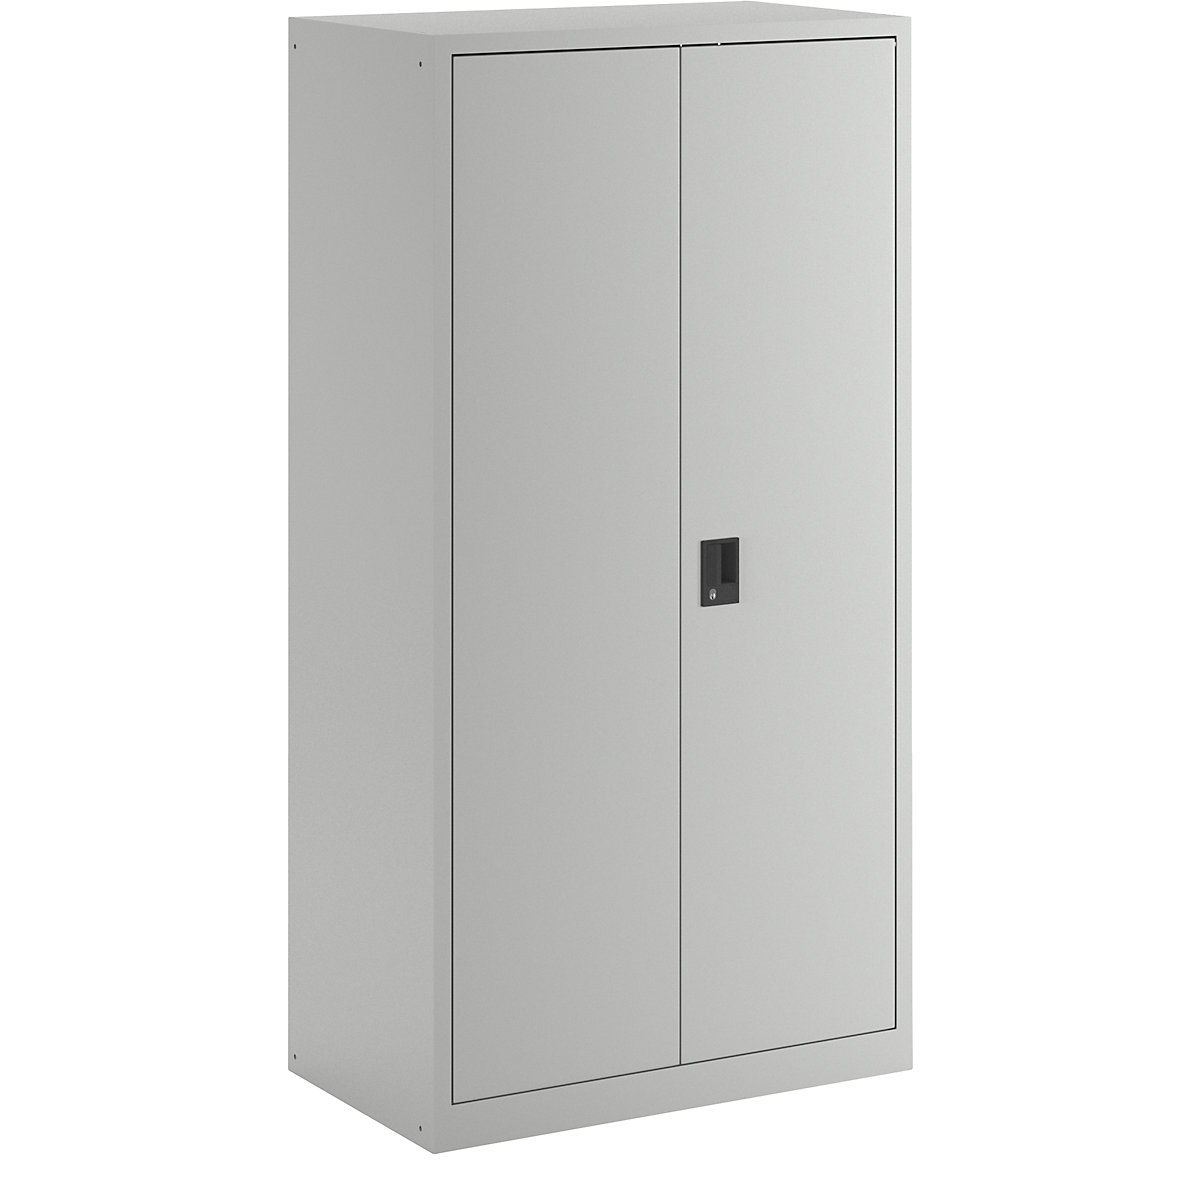 Battery charging cabinet – LISTA, 4 shelves, solid panel doors, 2 power strips at side, grey-22